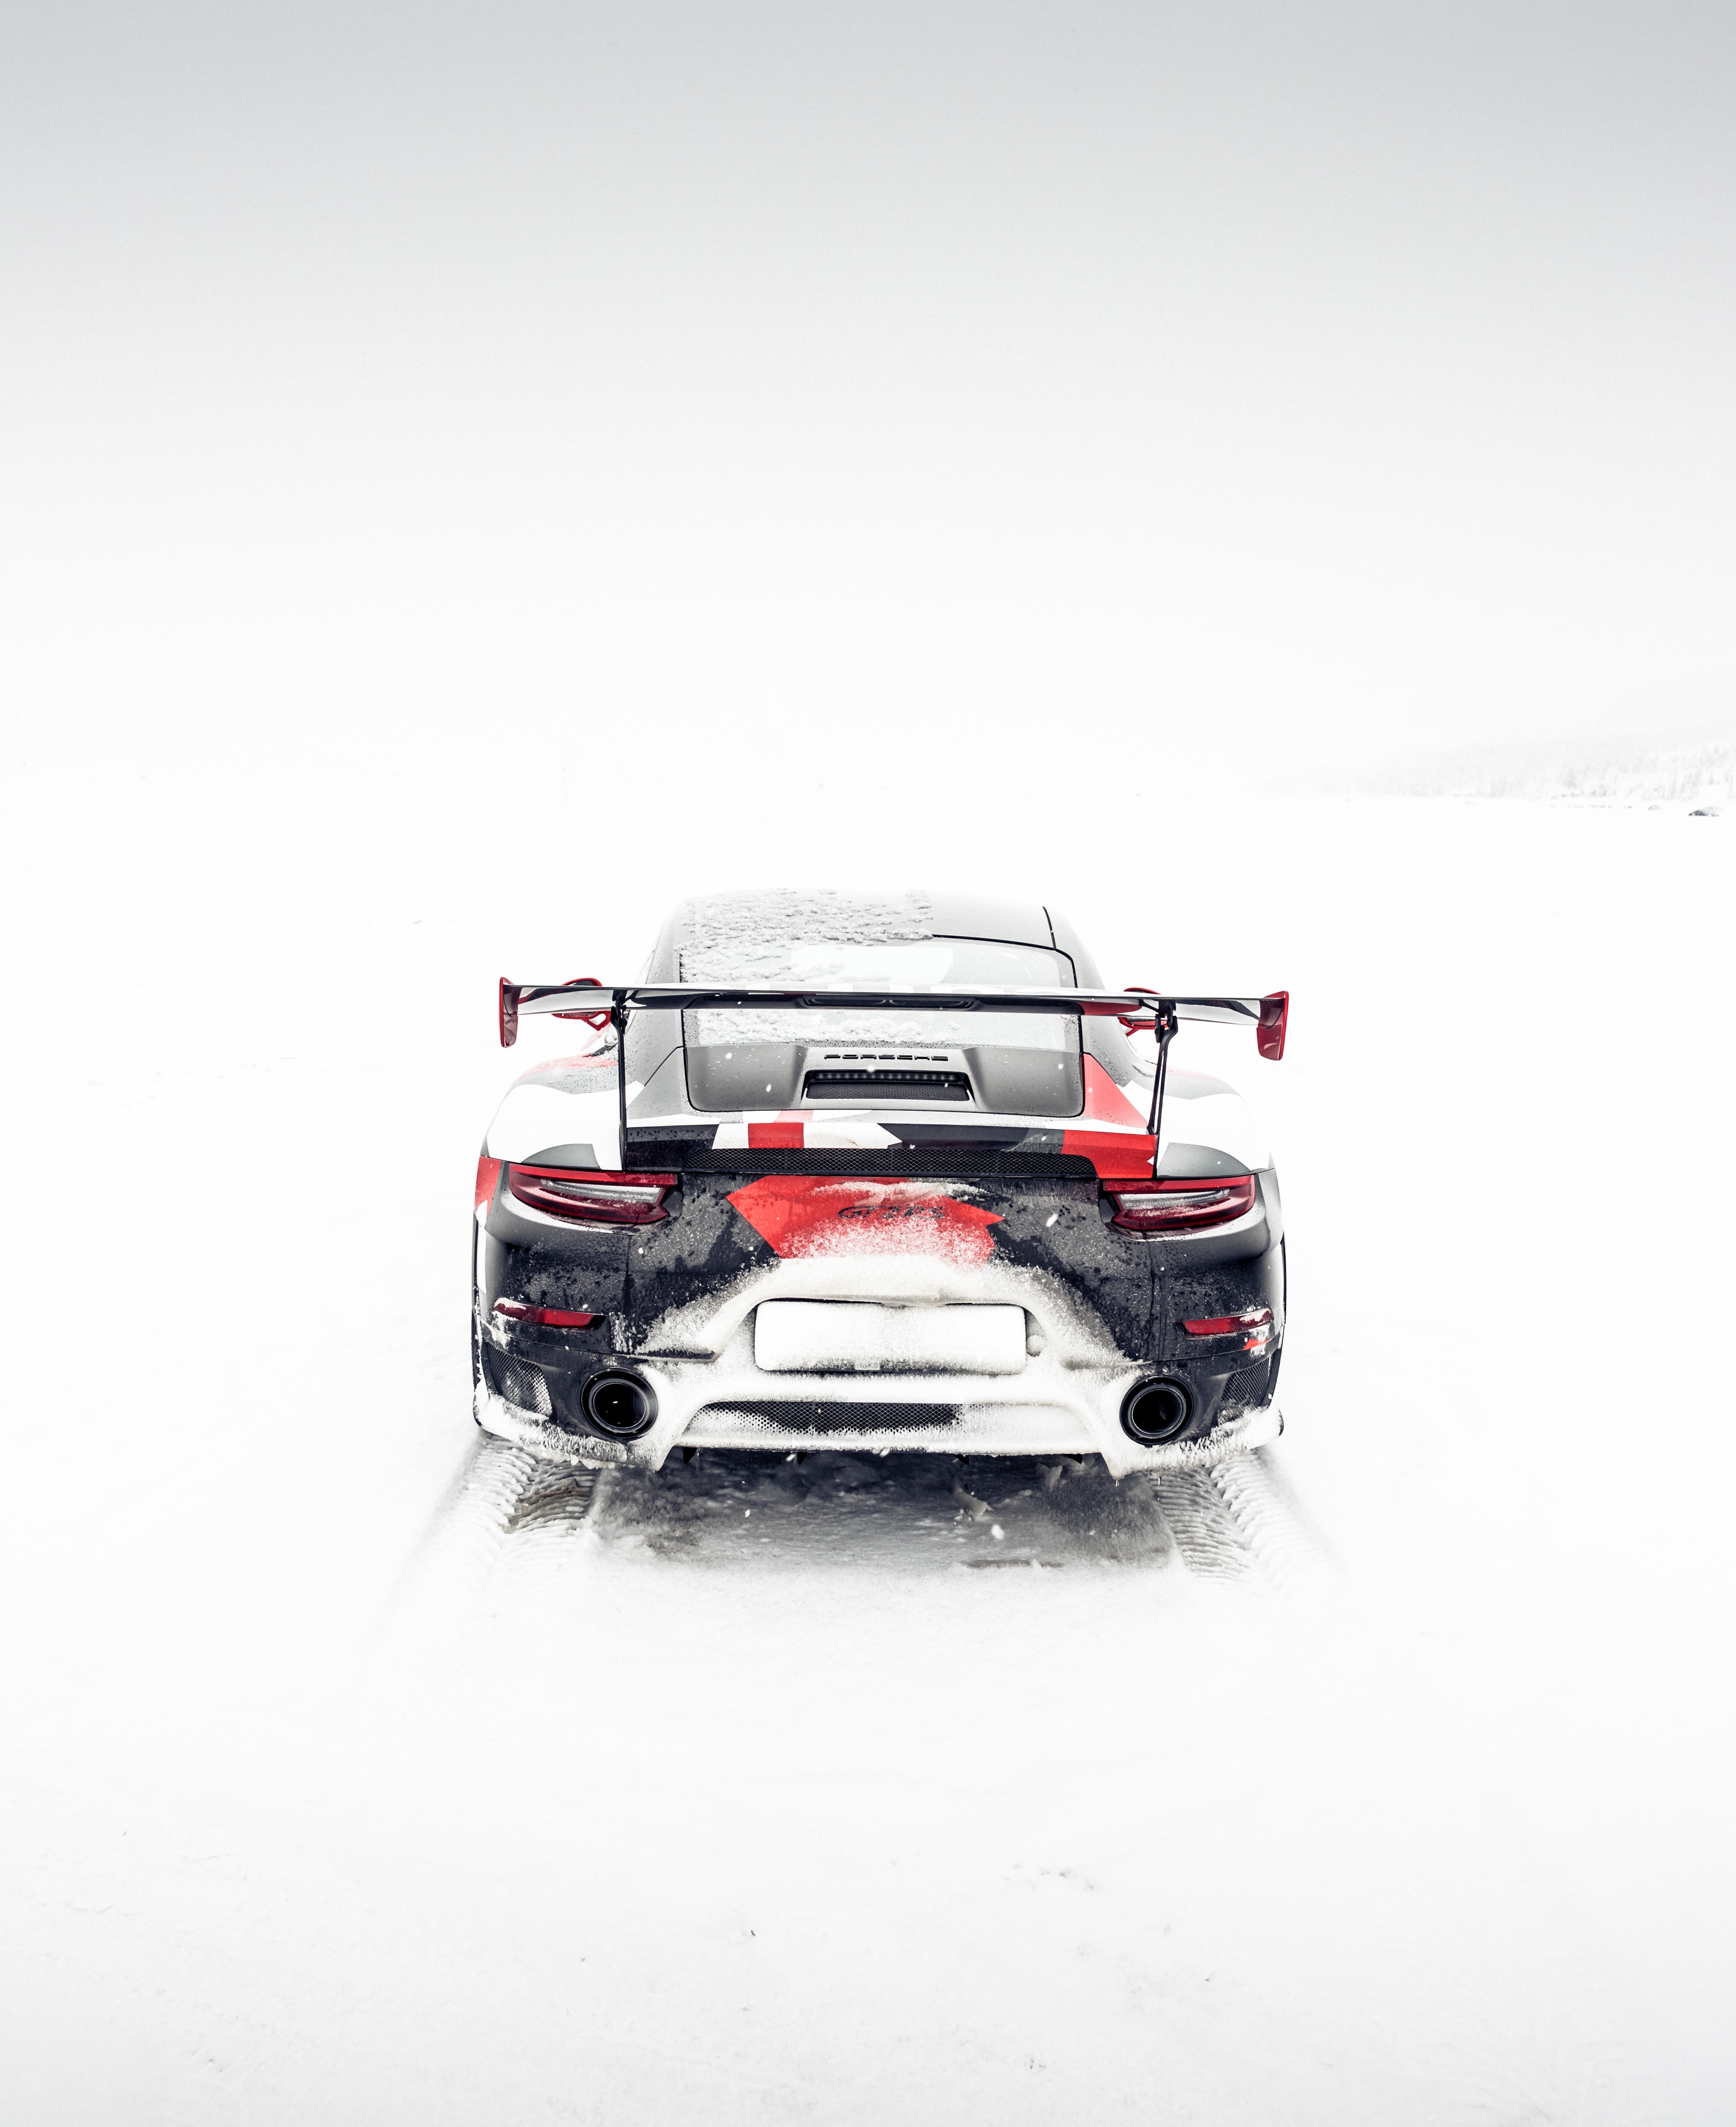 sports car, cars, sports, winter, snow, back view, rear view, off road, impassability HD wallpaper